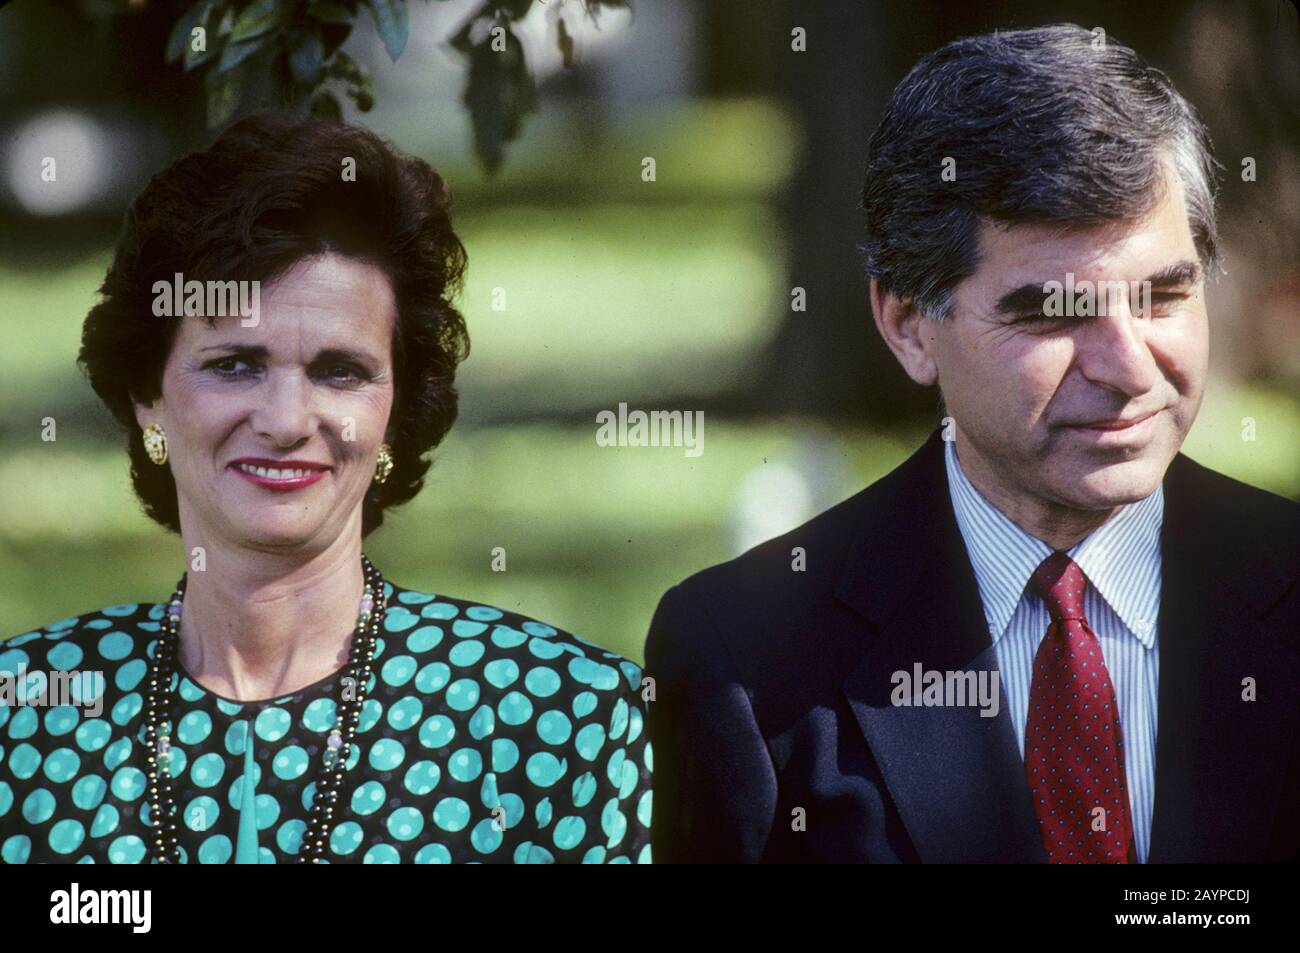 Democratic presidential candidate Michael Dukakis and his wife, Kitty, at a campaign event in Texas.1988. ©Bob Daemmrich Stock Photo